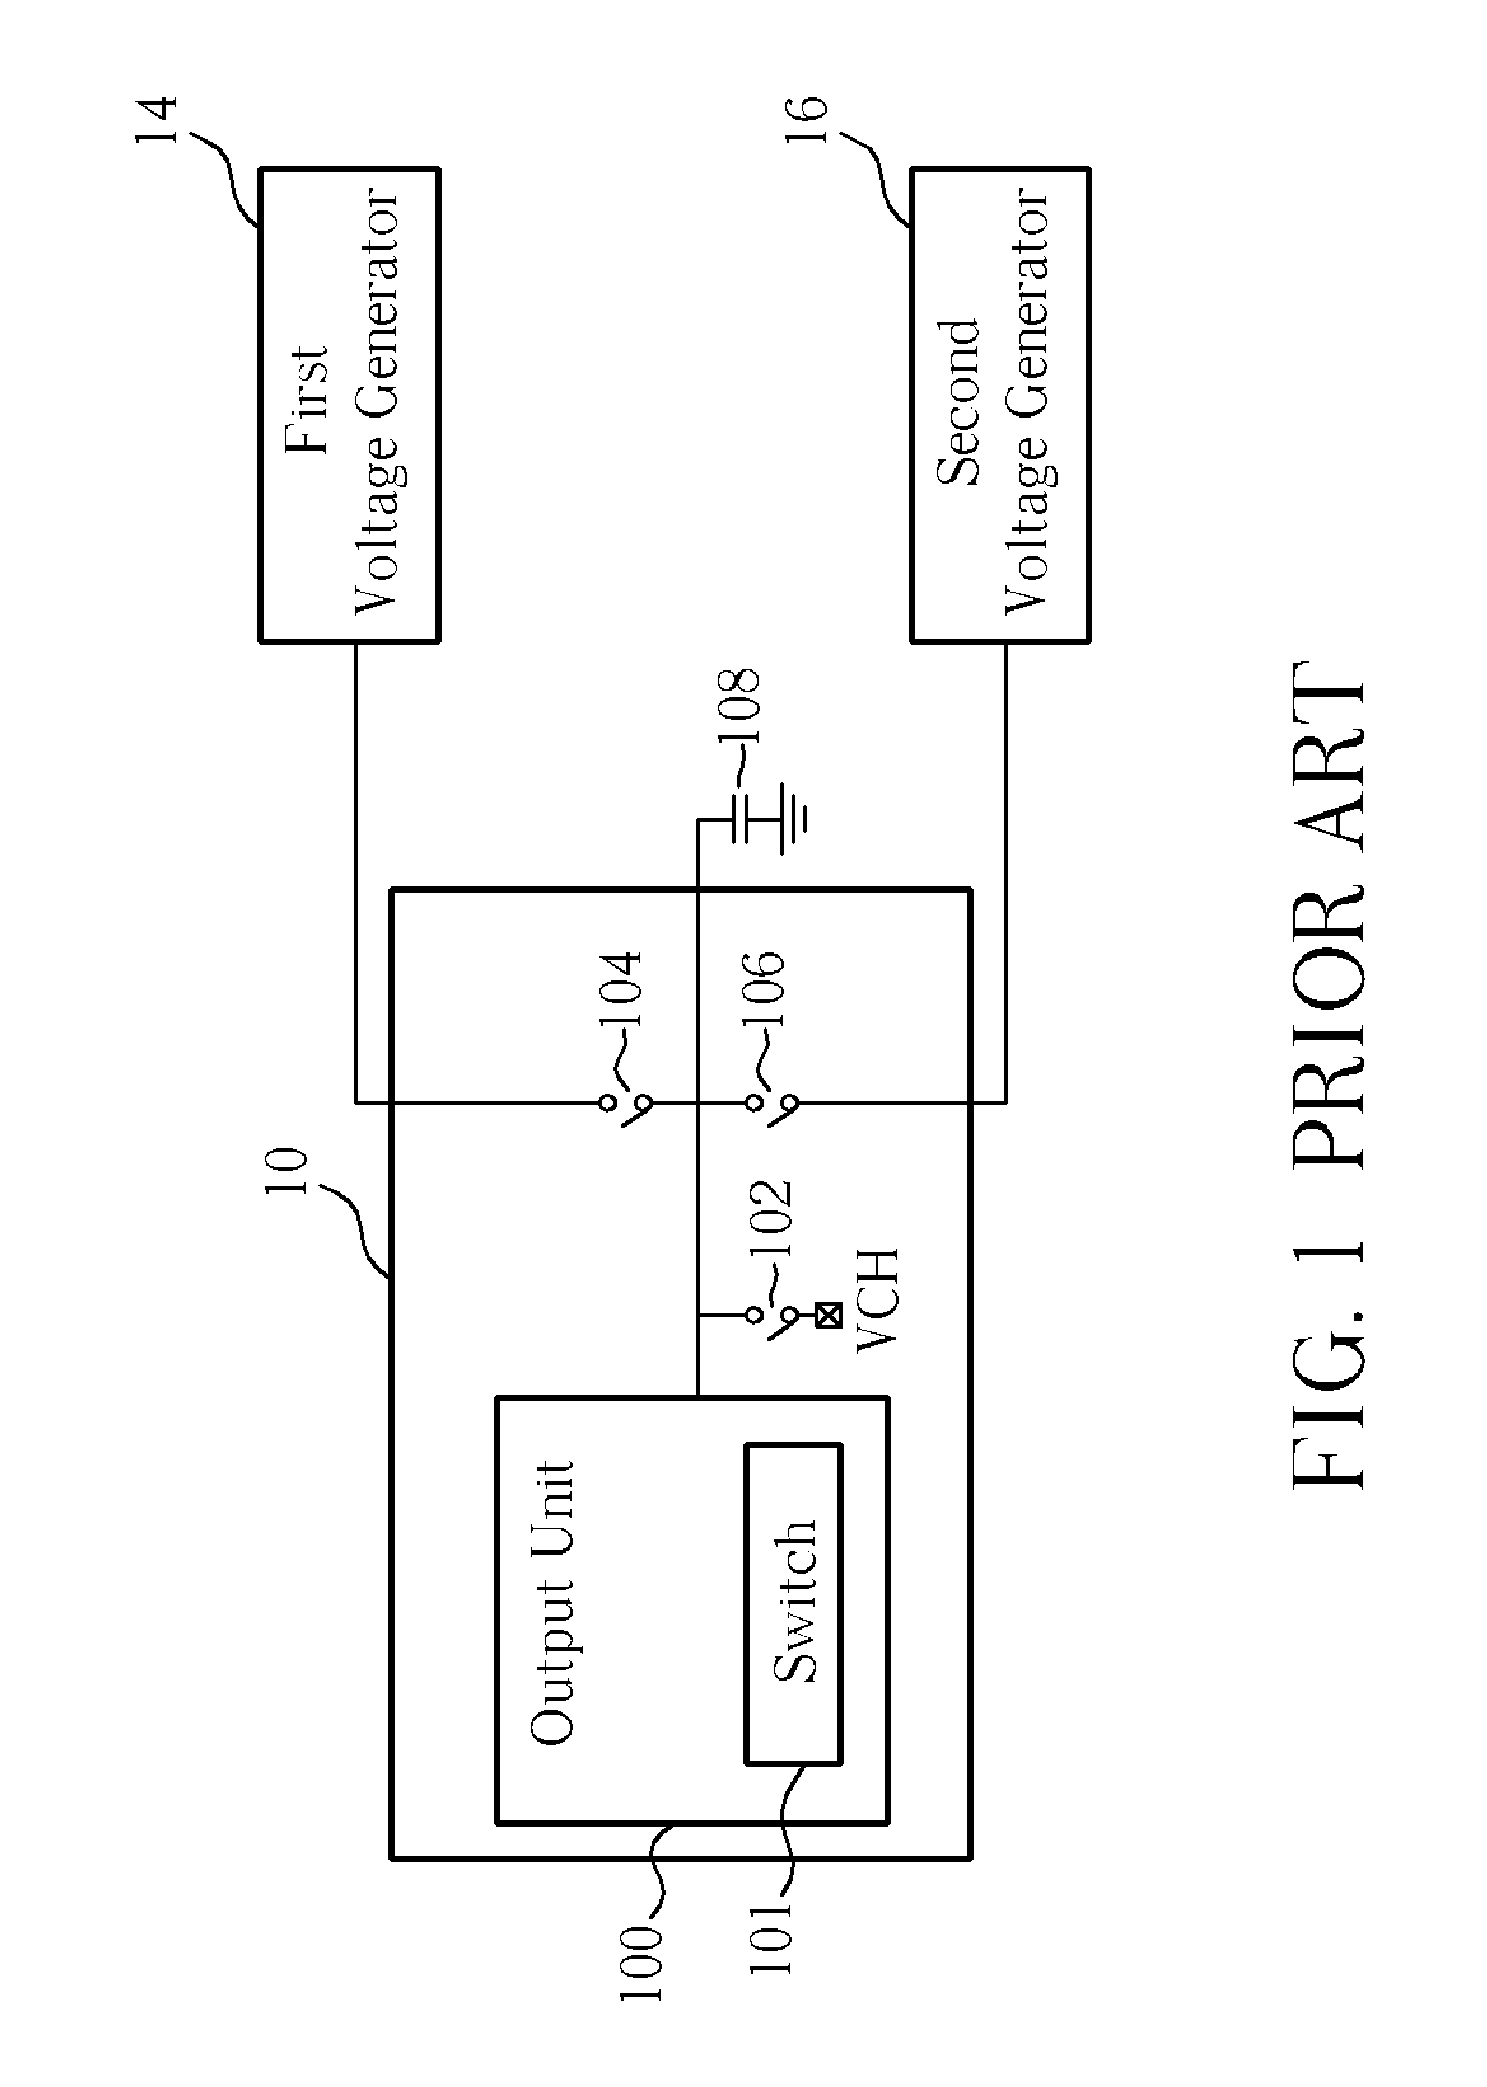 Electronic device of a source driver in an LCD device for enhancing output voltage accuracy